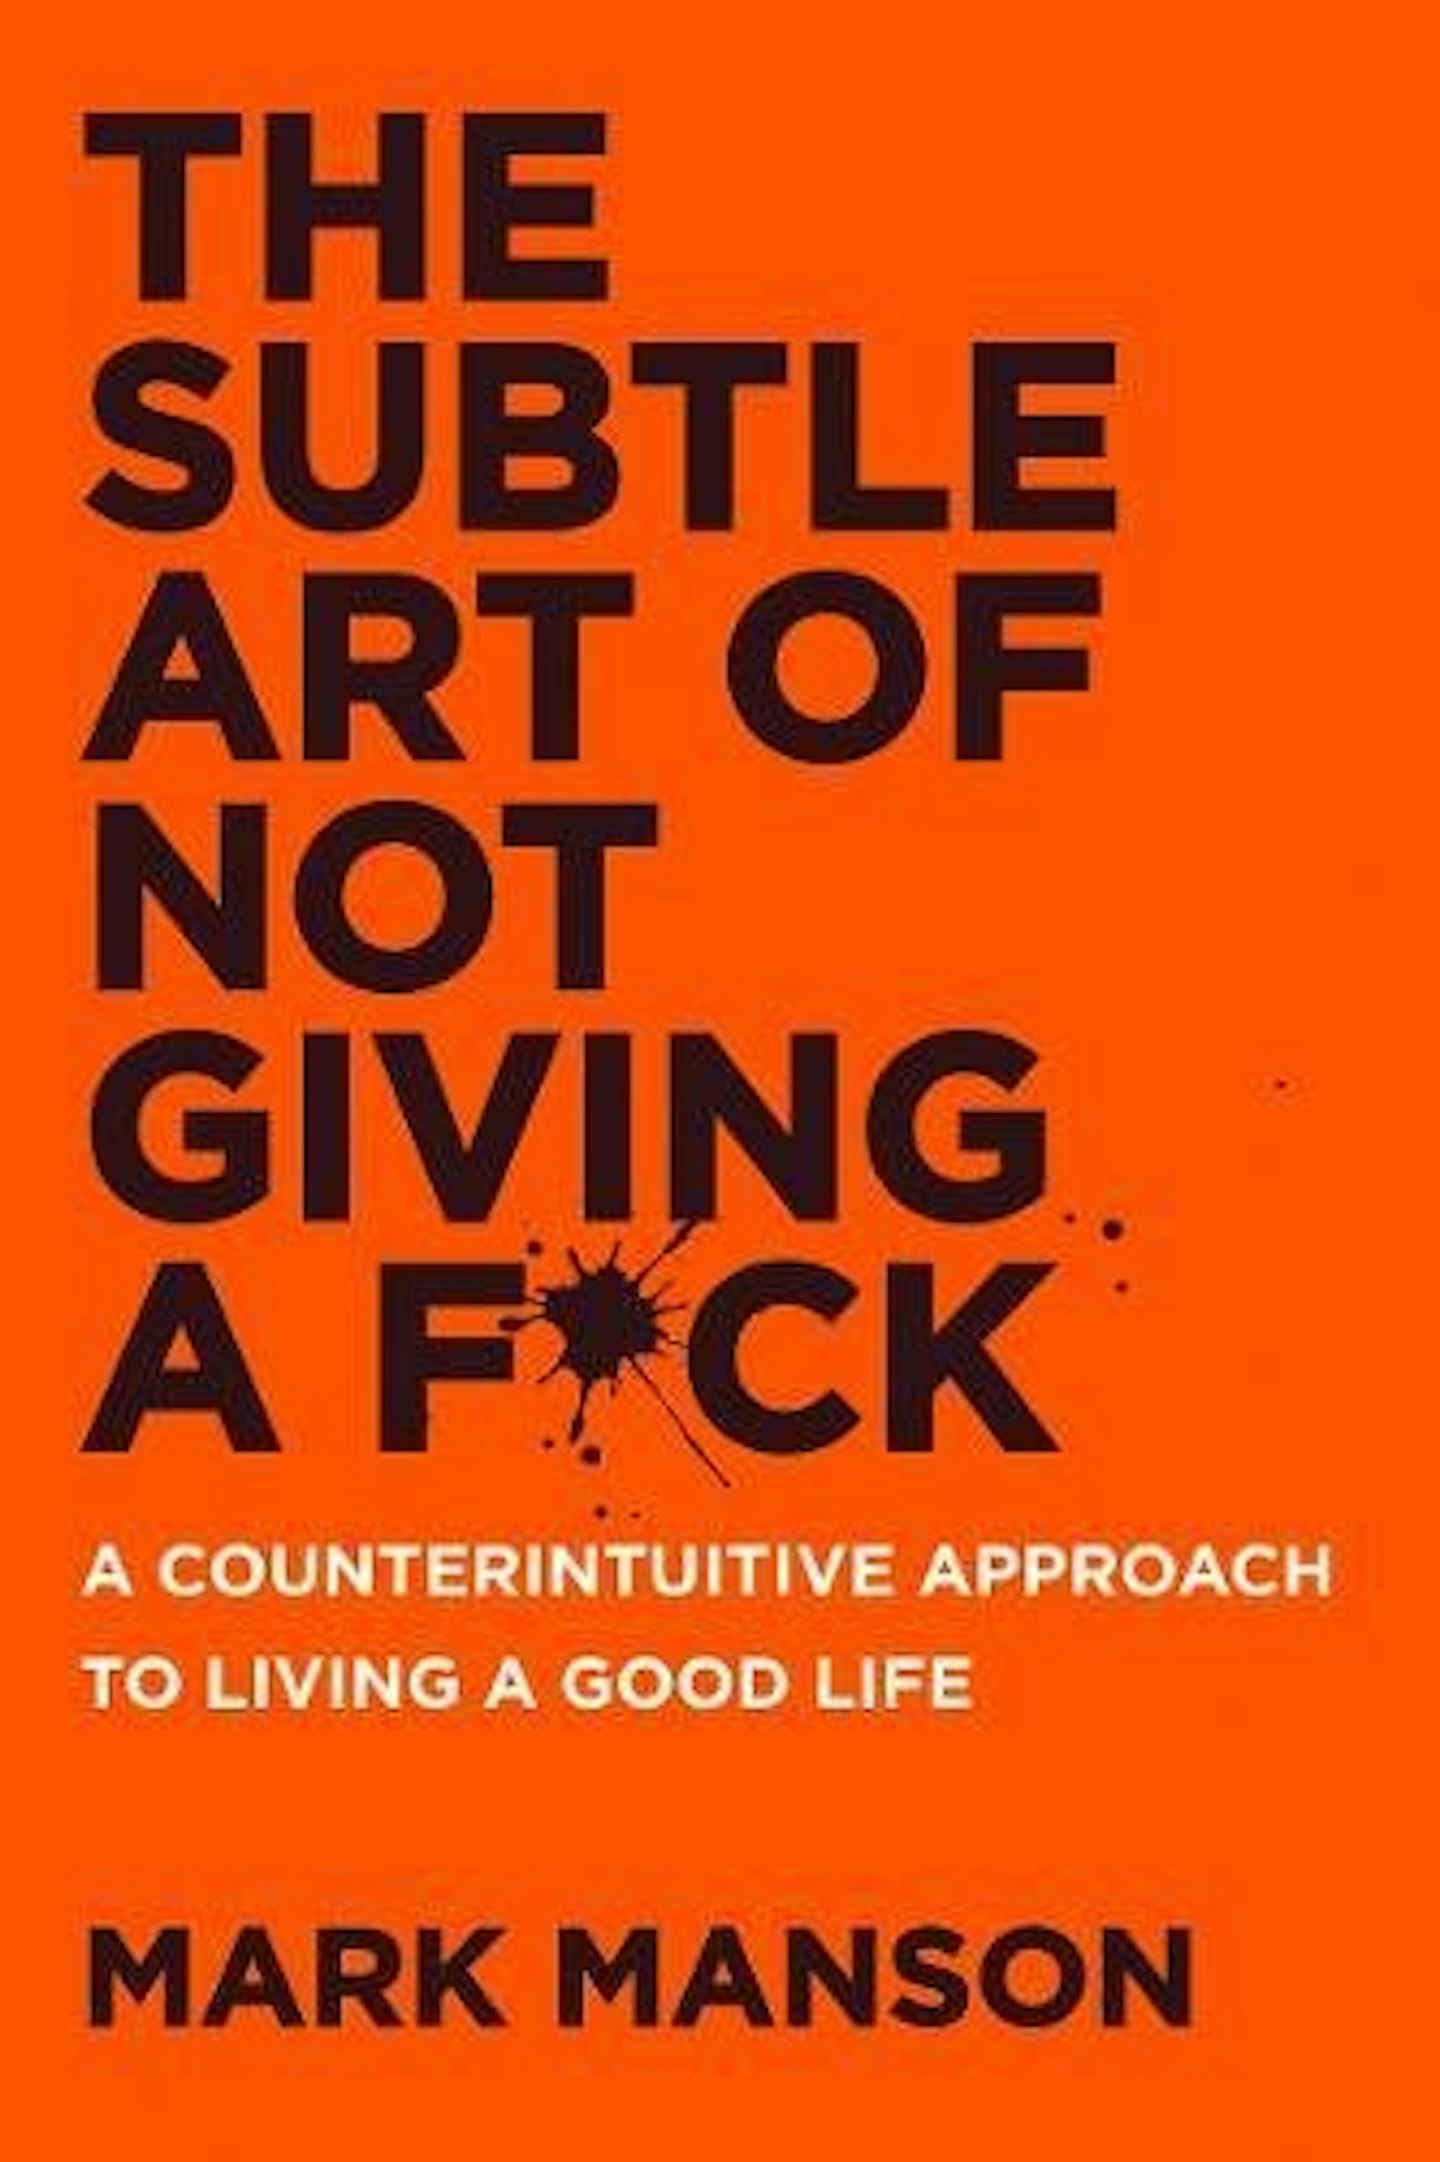 THE SUBTLE ART OF NOT GIVING A F*CK: A Counterintuitive Approach to Living a Good Life by Mark Manson, £12.99